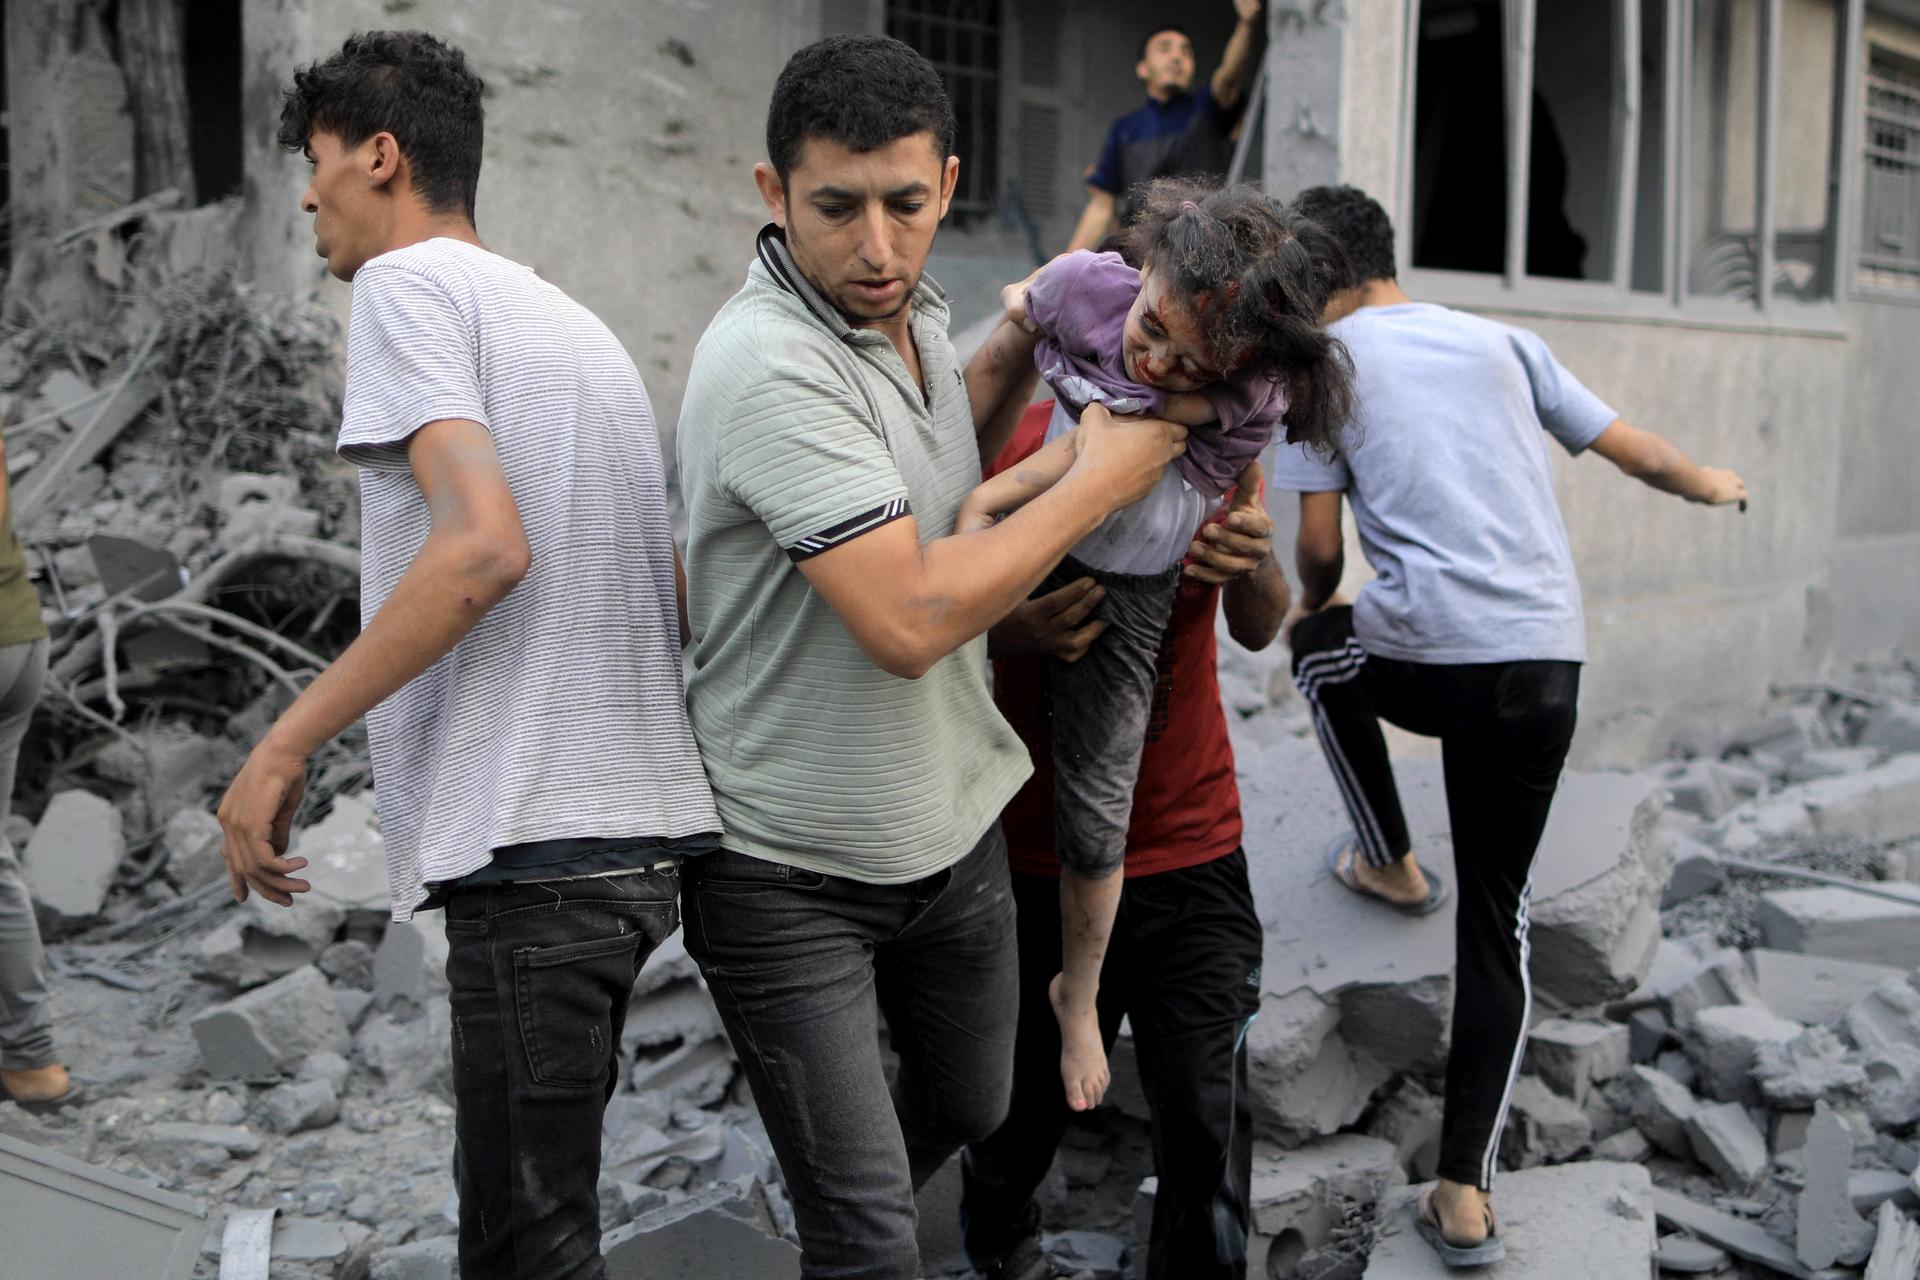 A Palestinian man rescues a girl from the rubble of a building following an Israeli strike in Khan Yunis in the southern Gaza Strip. (YASSER QUDIH/AFP via Getty Images)